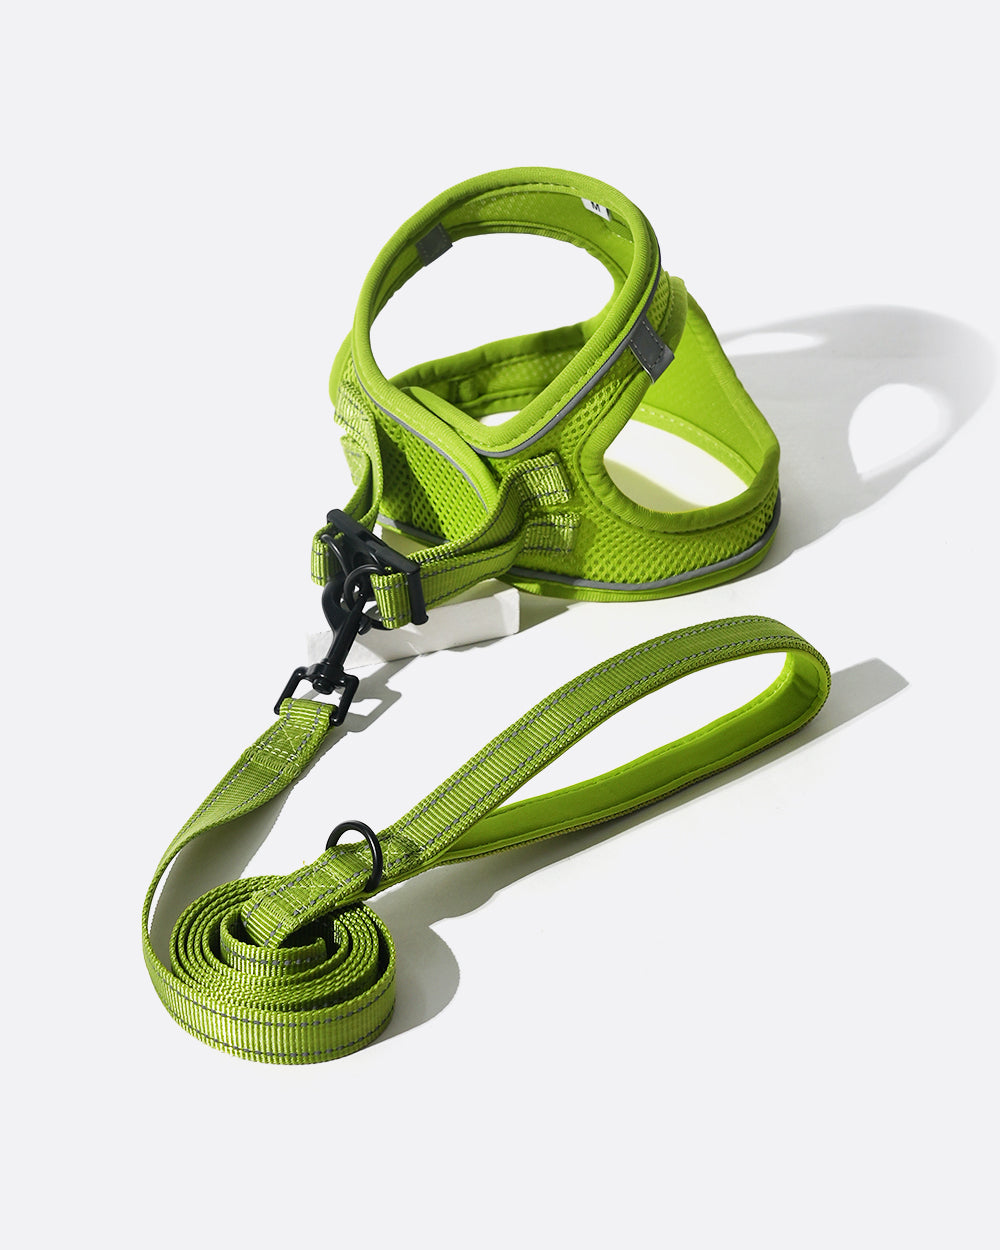 Showing the back of the walk-in dog harness, with 360-degree swivel buckle and metal D ring, simple and comfortable design, puppies can use it all year round, Avocado Green